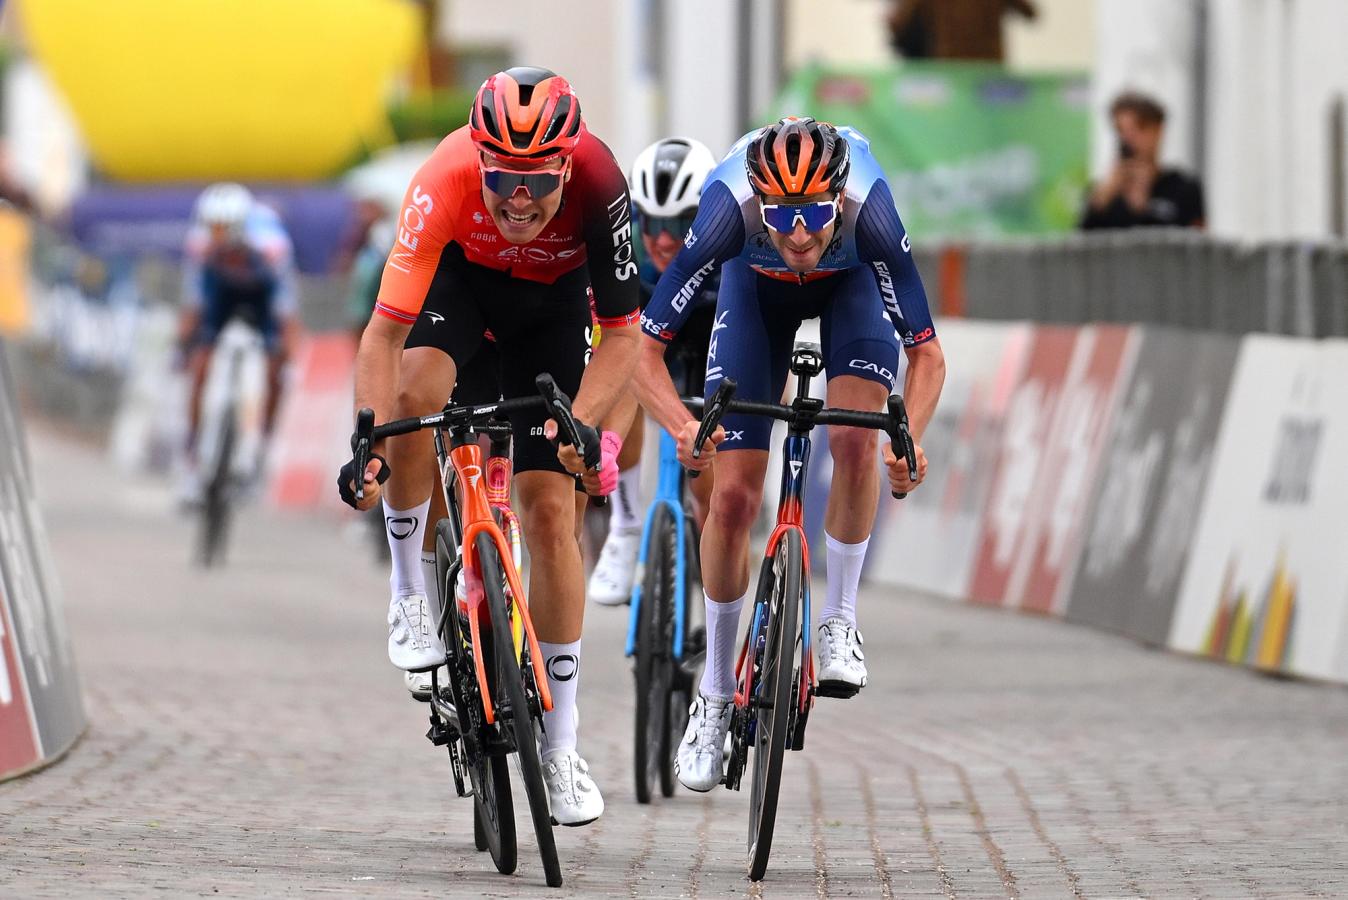 Monday marked Foss' first victory in a professional road race in Europe